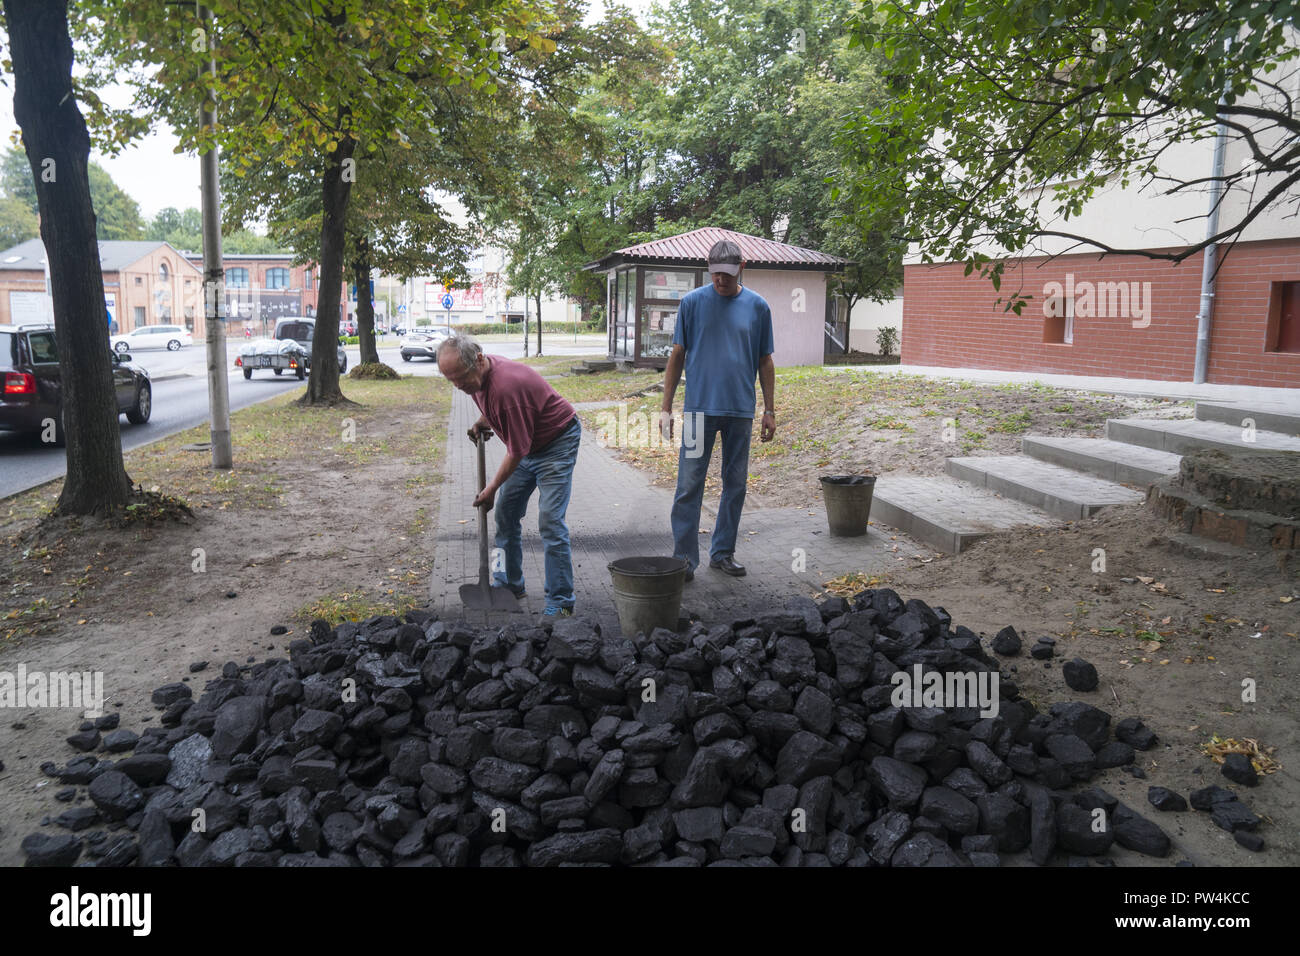 Men move a coal delivery into an apartment building in Zielona Gora, Poland. Some old buildings still use coal for heating. Stock Photo